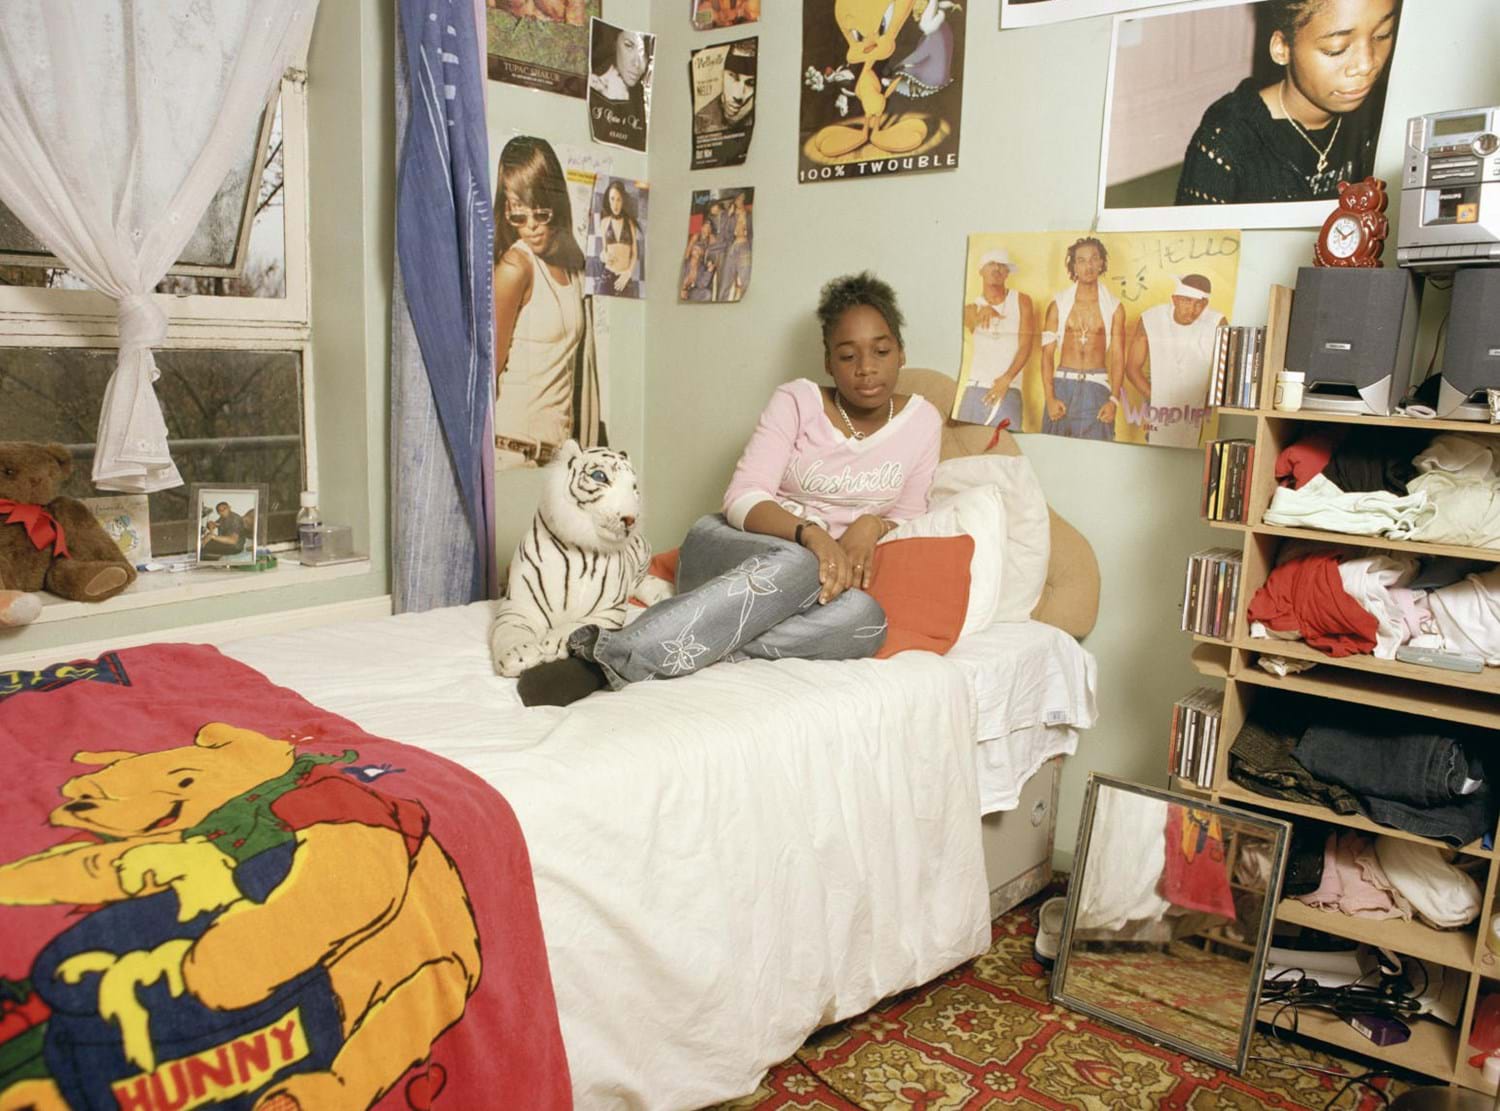 A young person sitting on their bed in a room decorated with posters